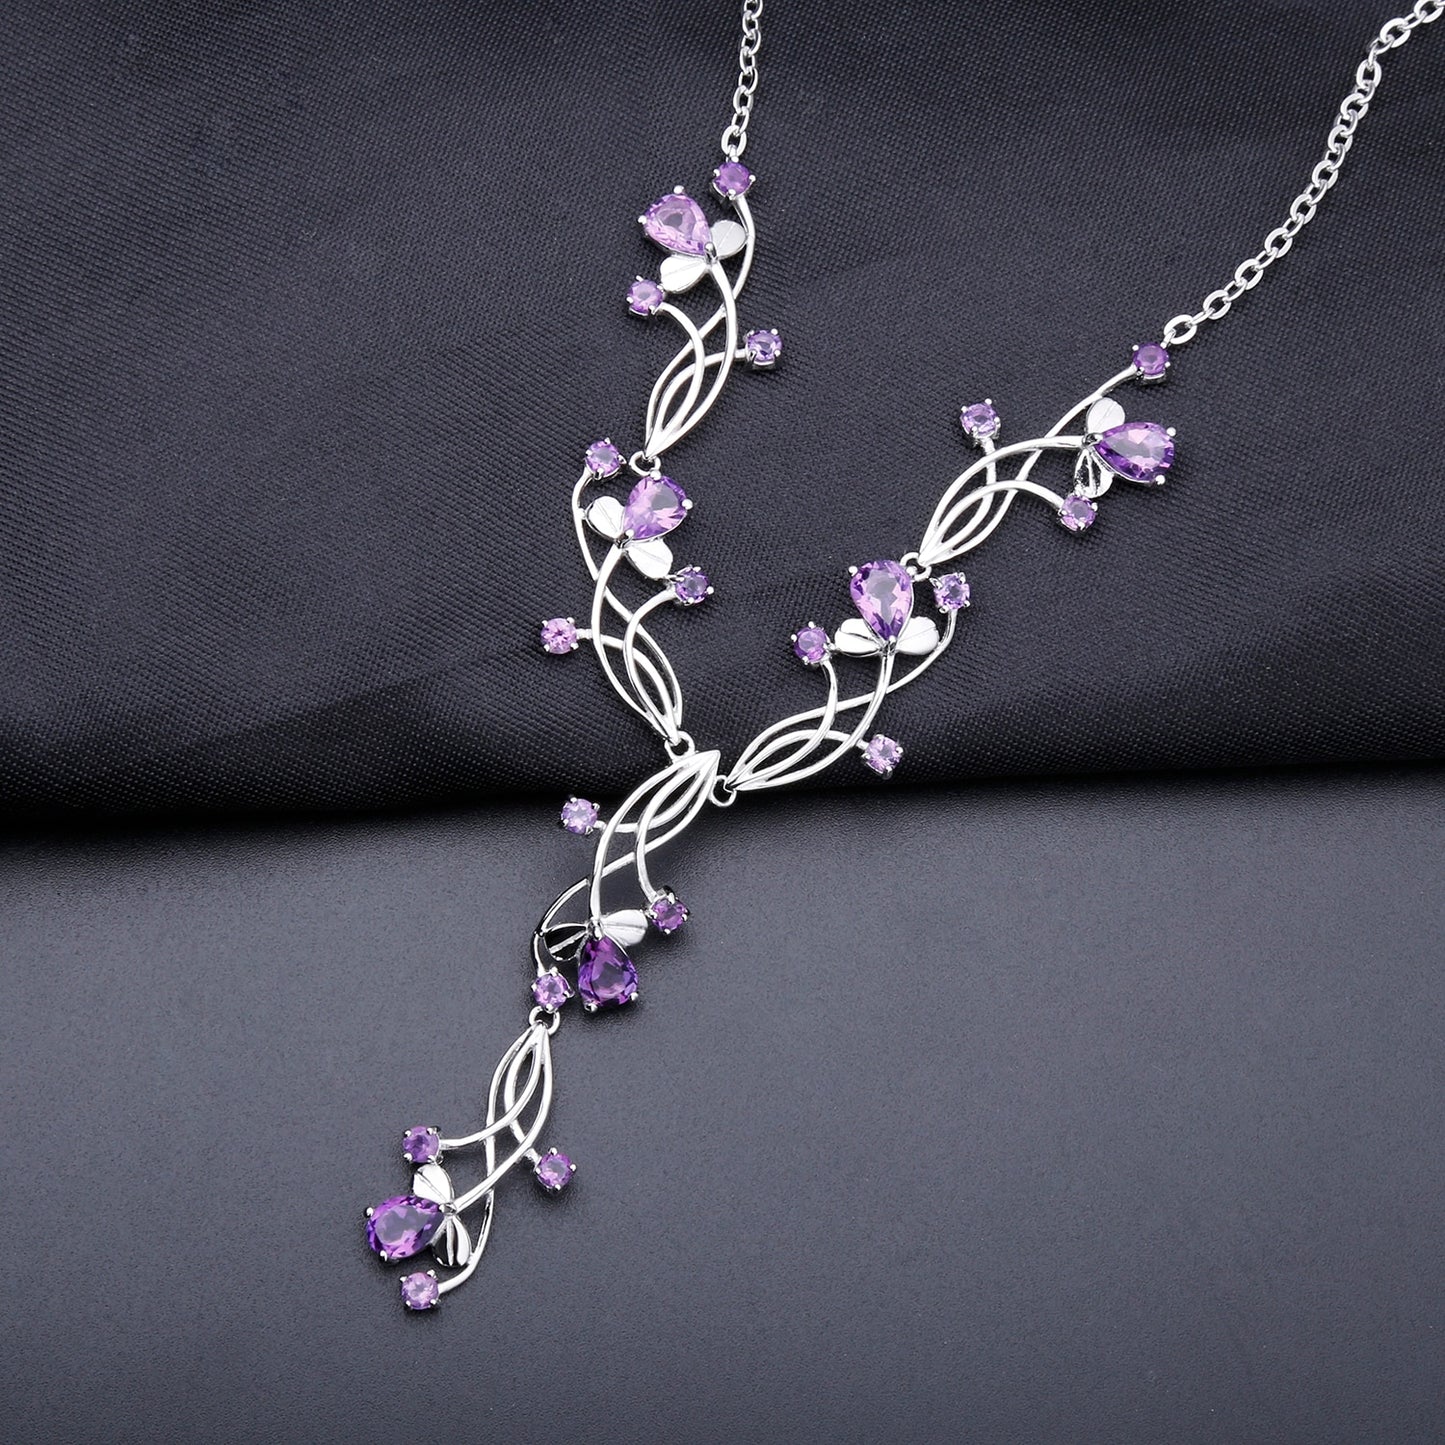 Ivy Necklace with Berries in 925 Silver and Natural Stones